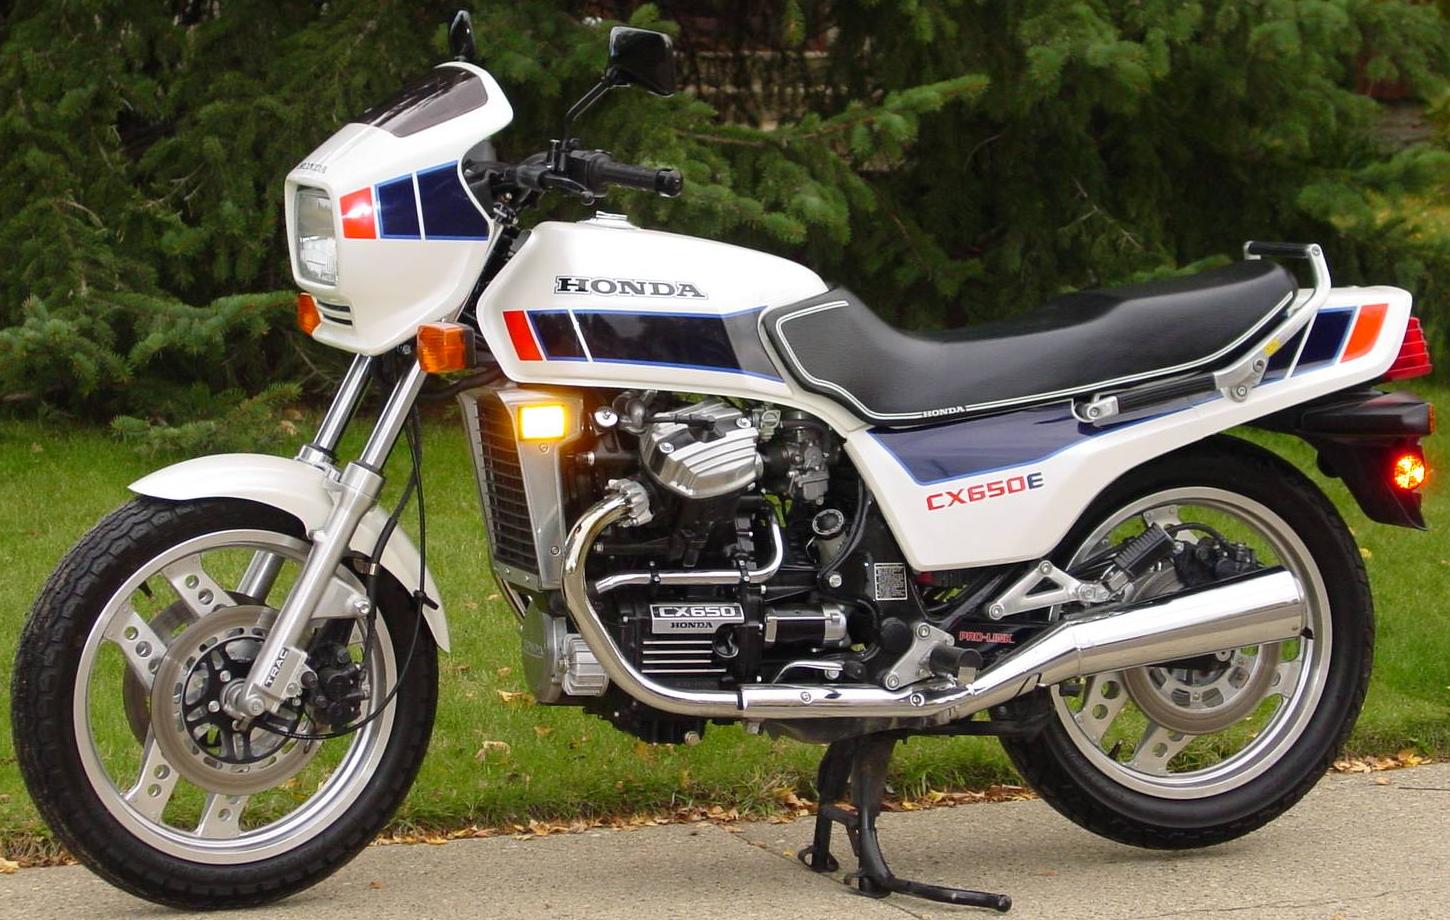 A Honda CX650E 'Eurosport' motorcycle from 1983 on a driveway